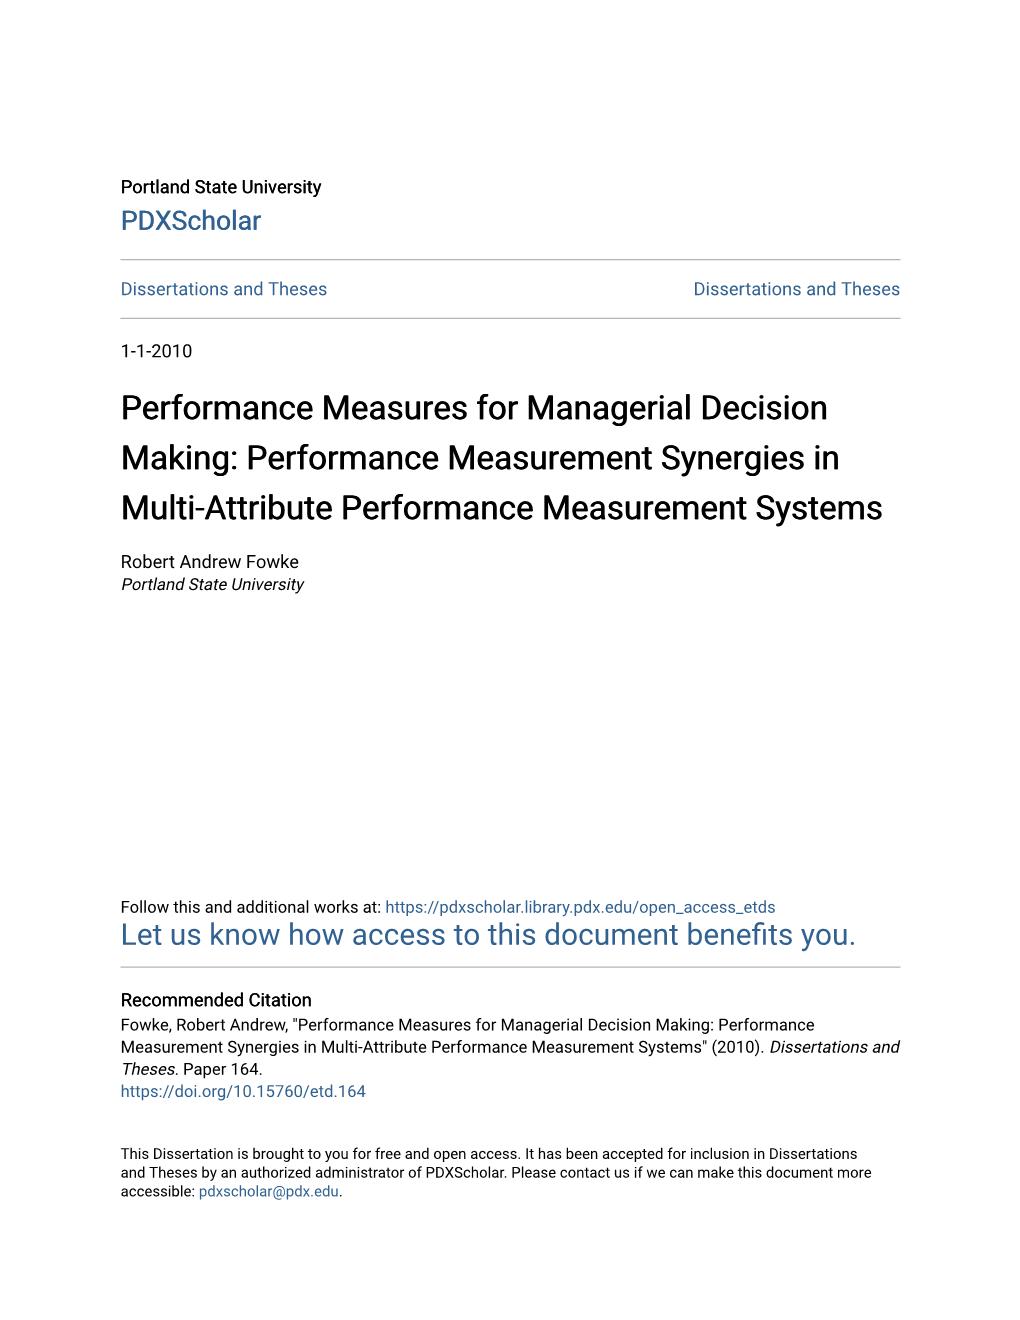 Performance Measures for Managerial Decision Making: Performance Measurement Synergies in Multi-Attribute Performance Measurement Systems